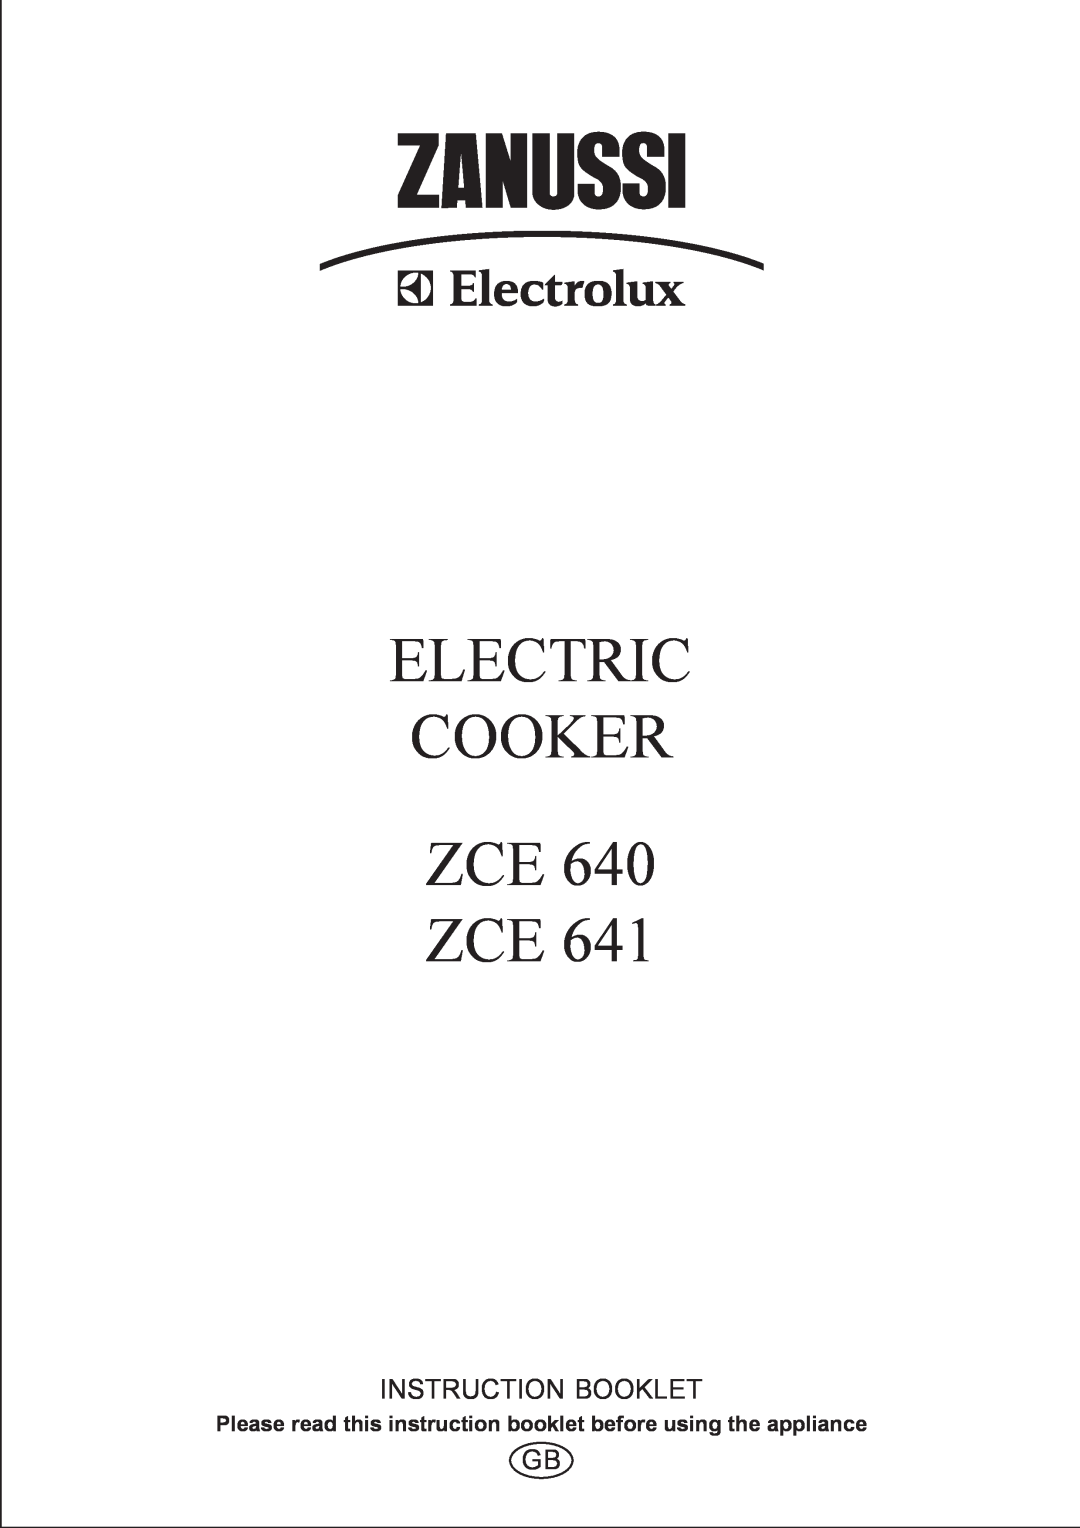 Zanussi ZCE 640, ZCE 641 manual Please read this instruction booklet before using the appliance, Electric Cooker Zce Zce 